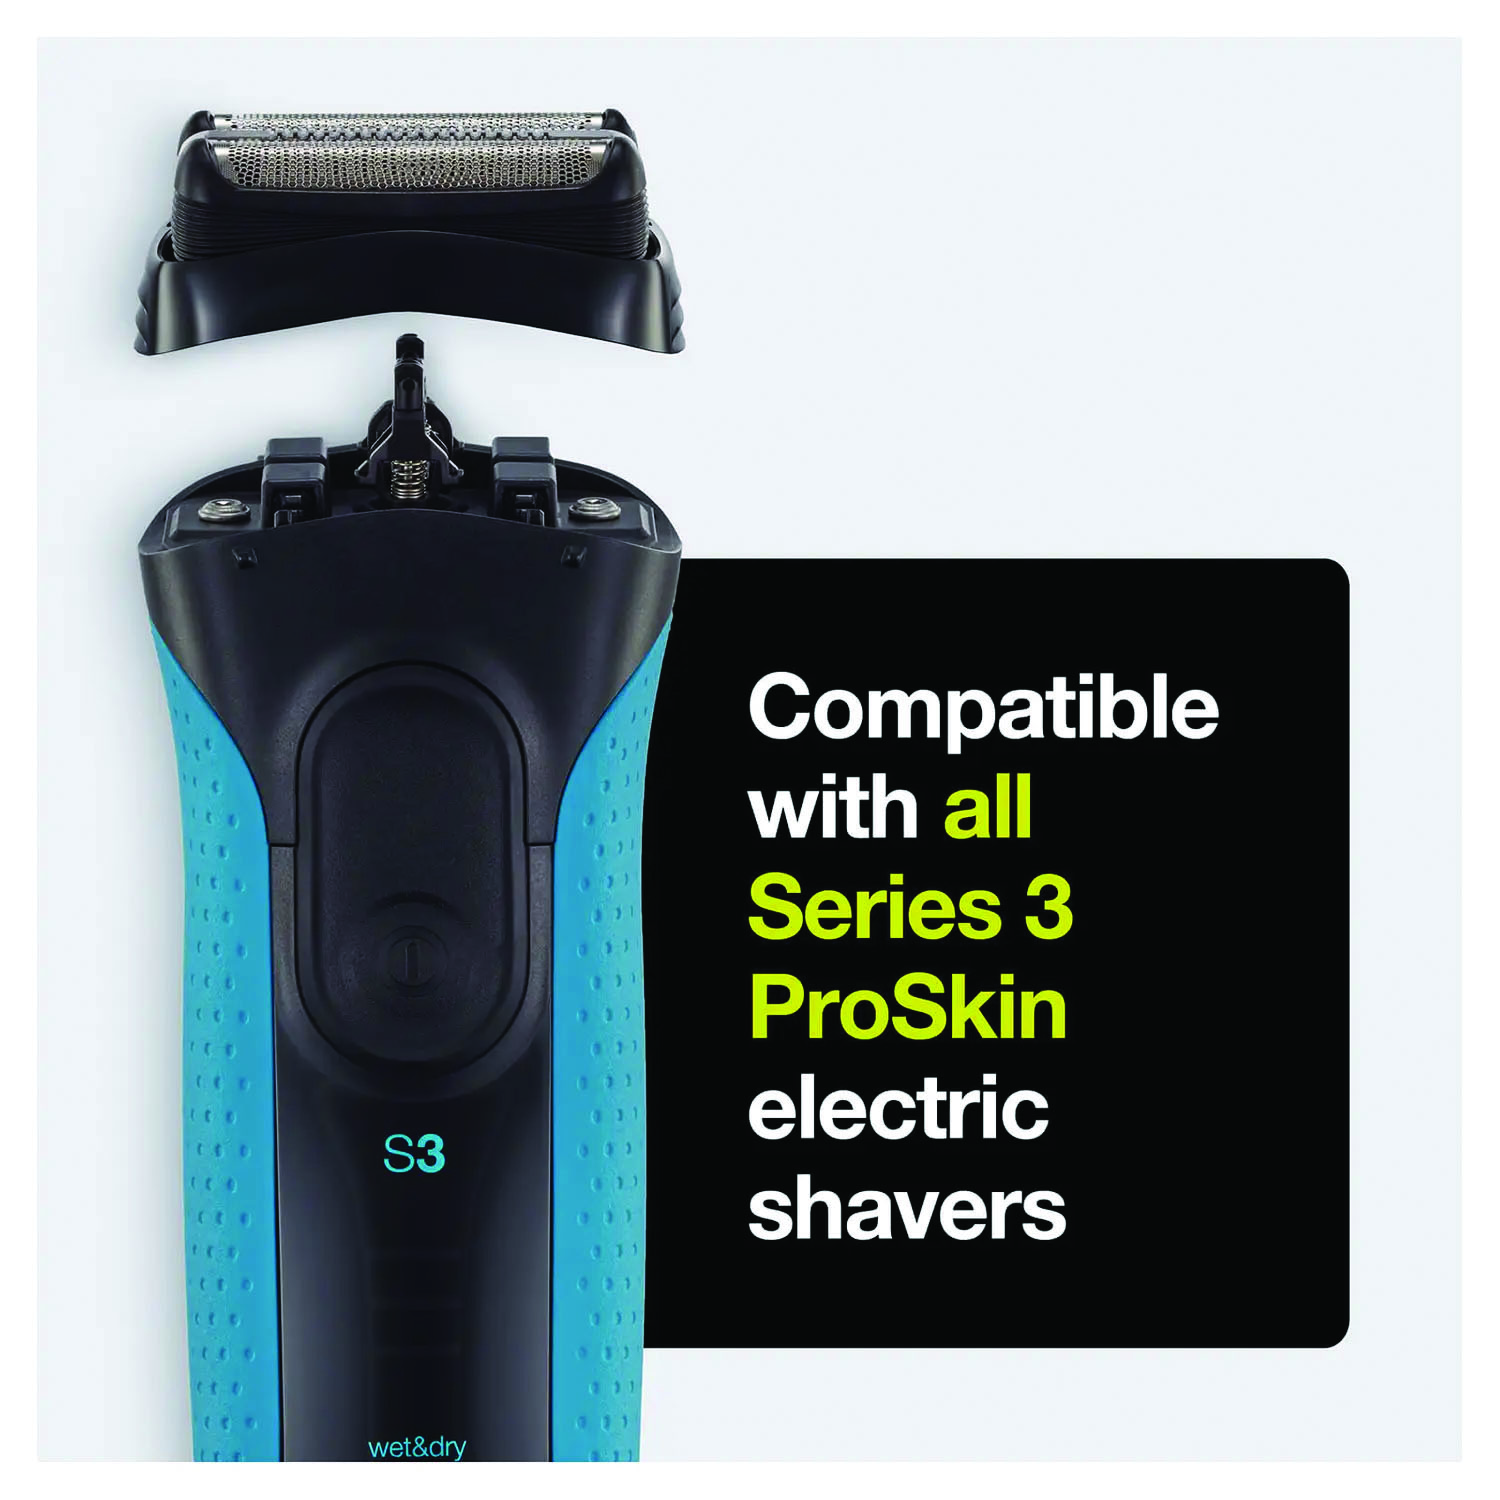 Compatible with Series 3 shavers